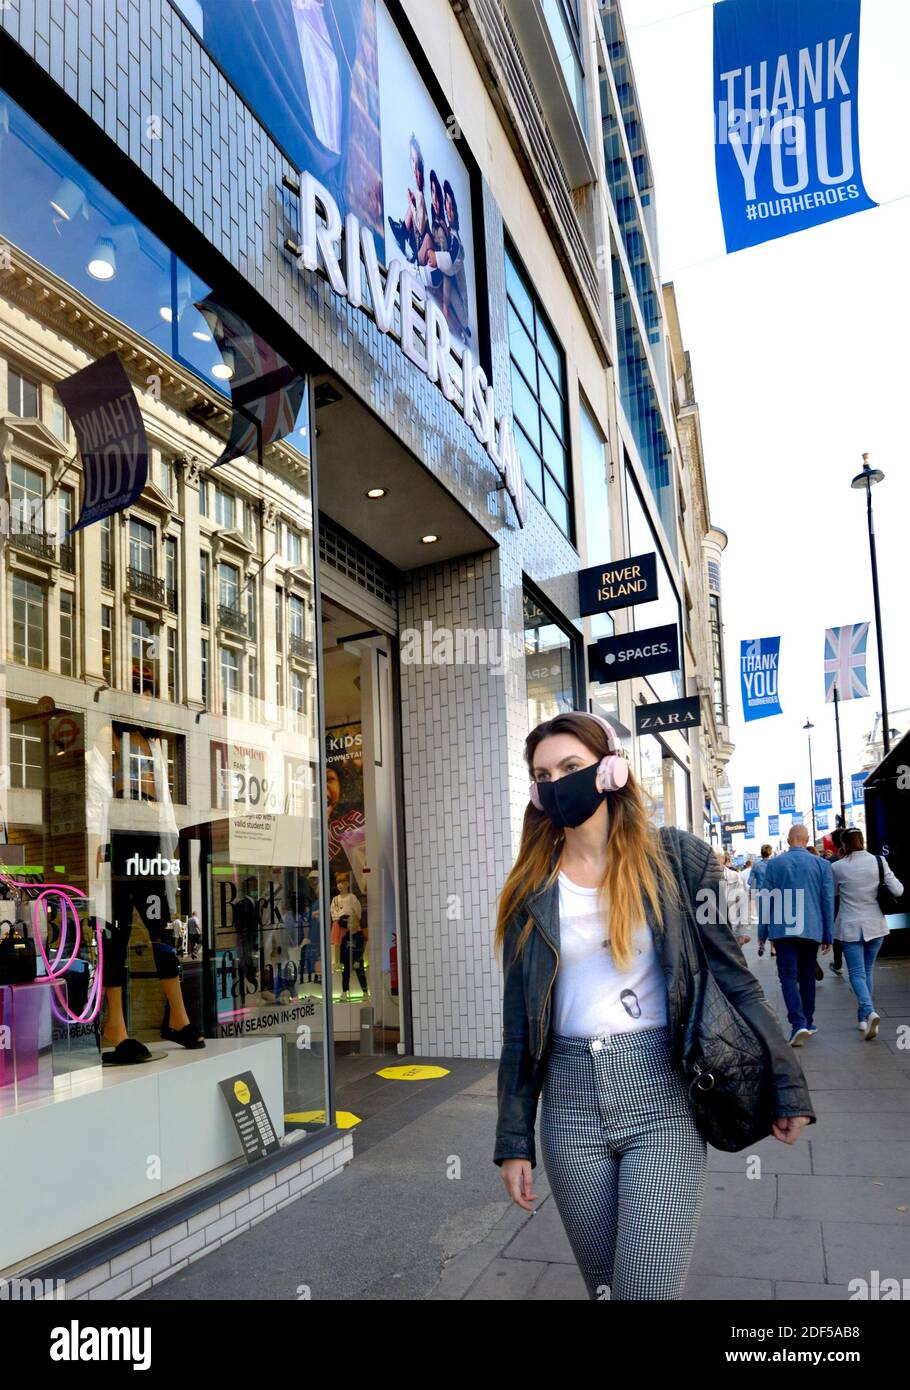 London, England, UK. Woman wearing face mask and headphones in Oxford Street during the COVID pandemic, 2020 Stock Photo